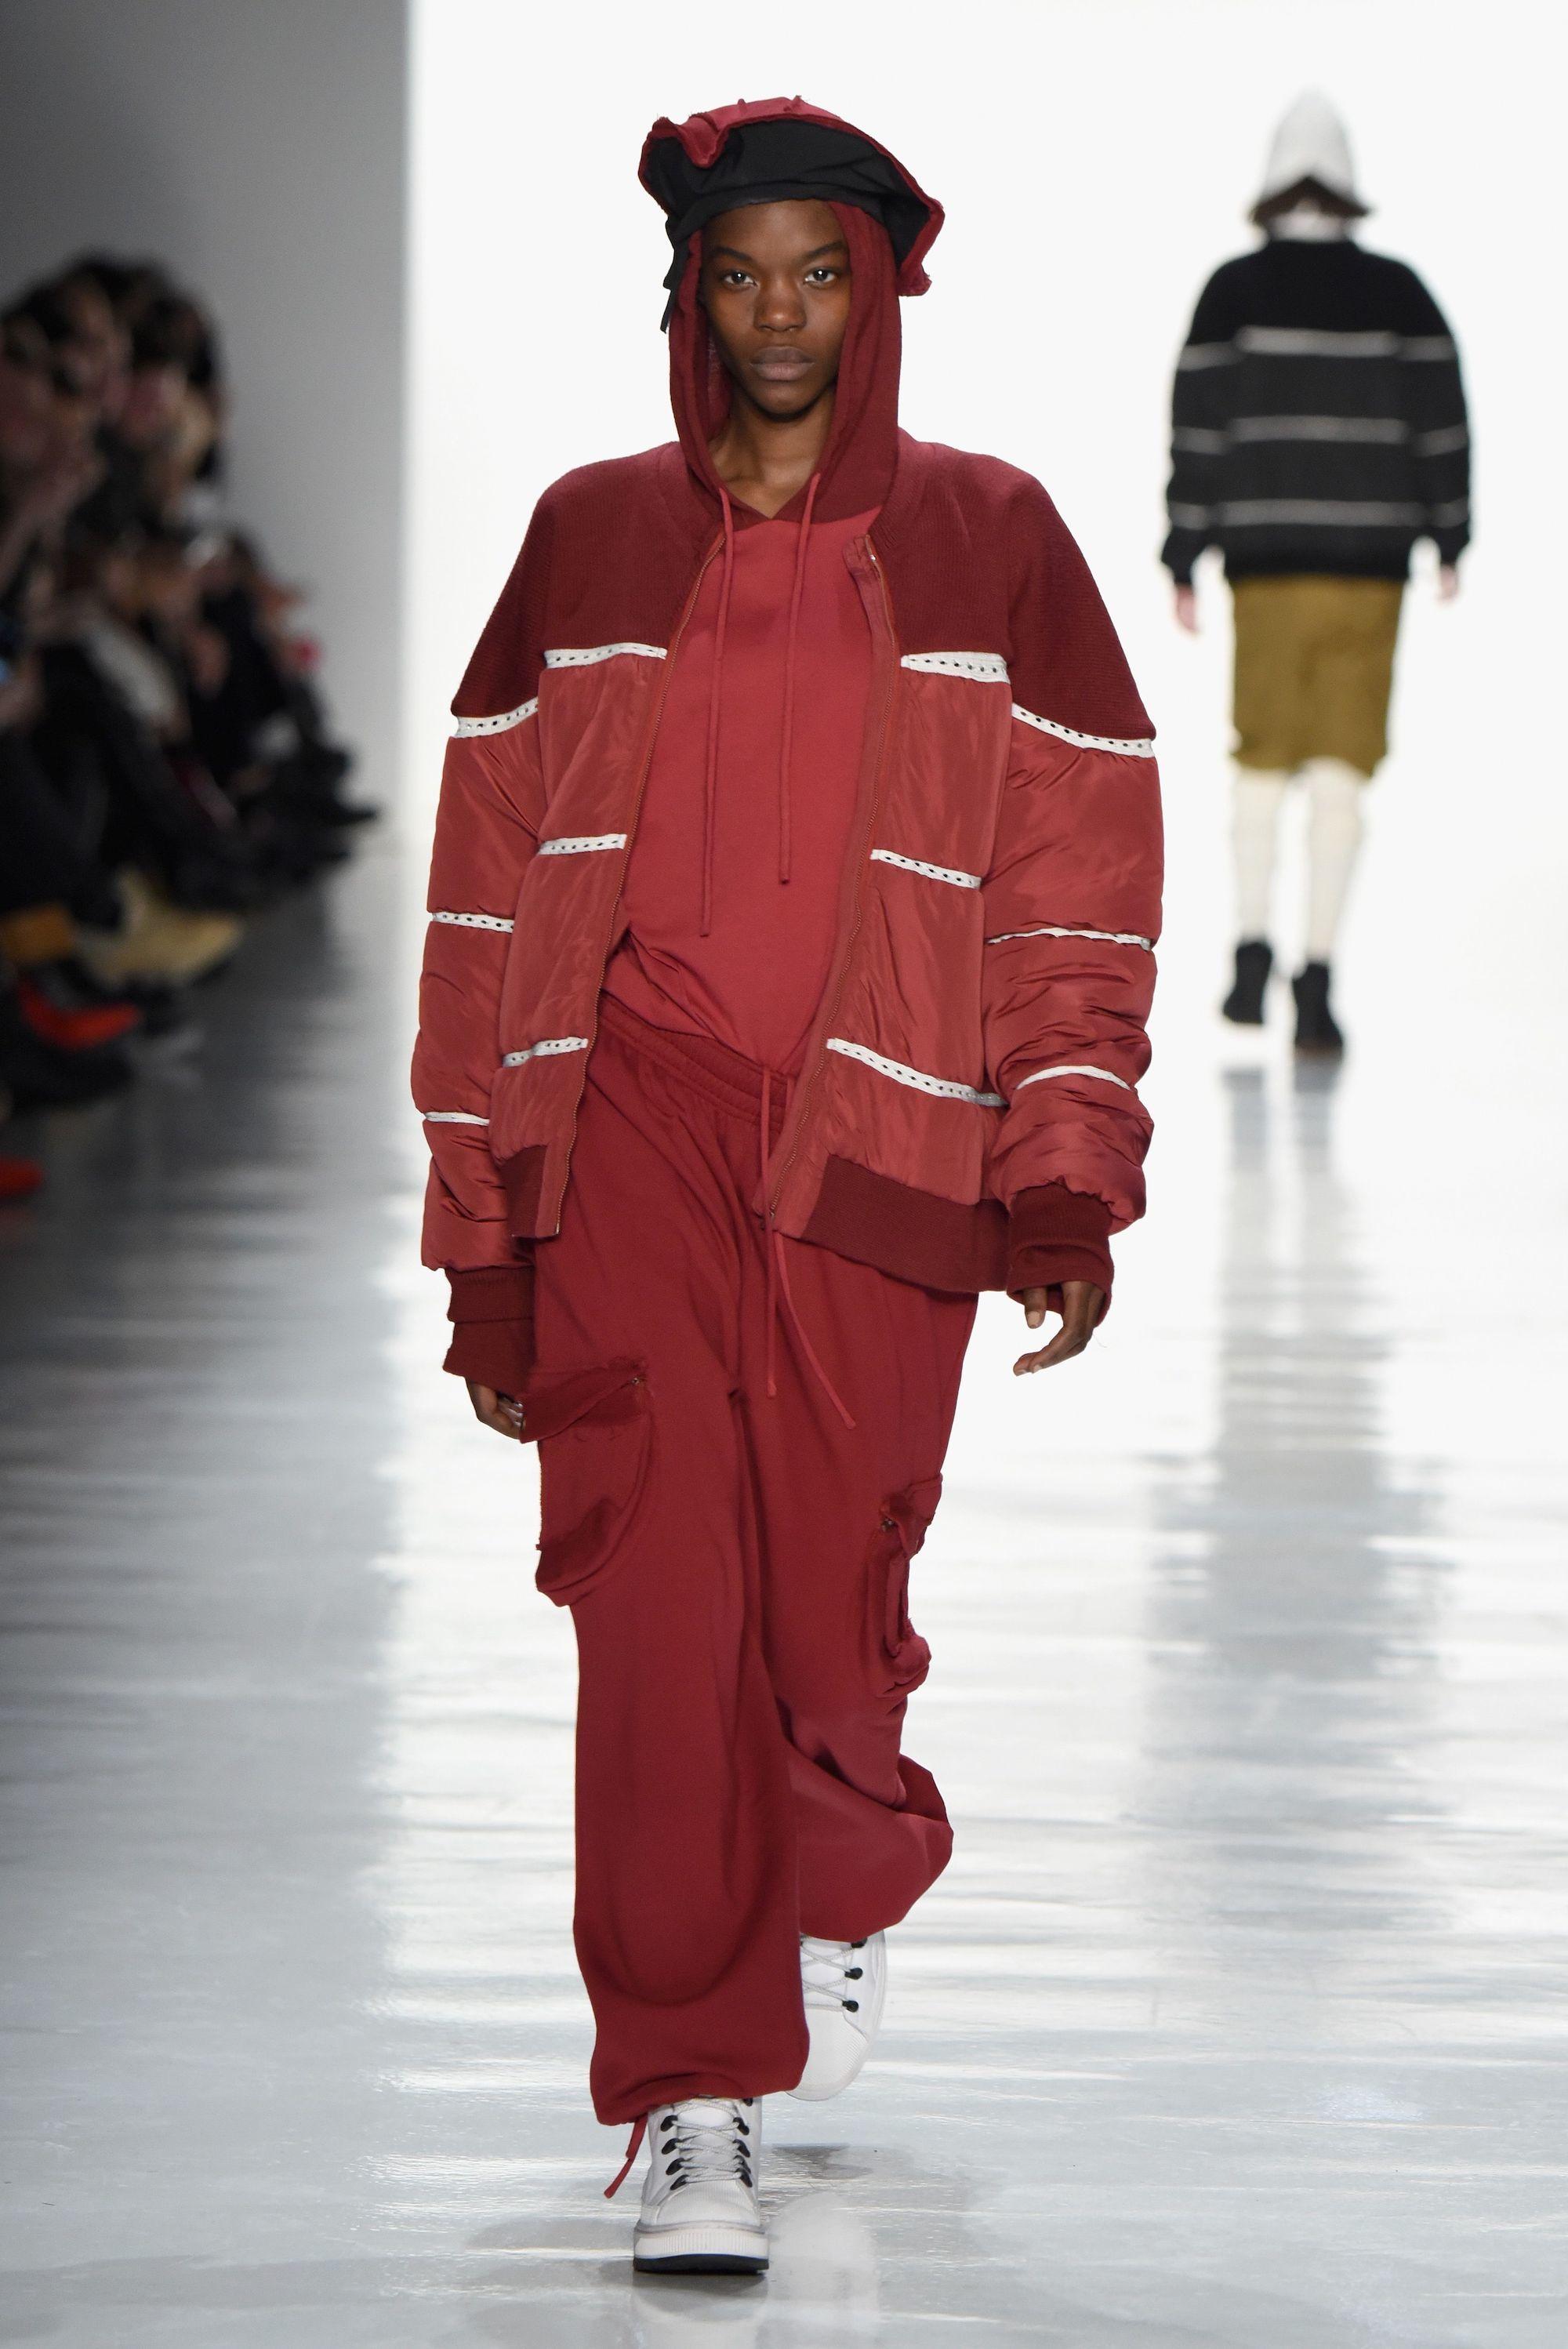 telfar made a patchwork of his past favorites for fall/winter 17 | read ...